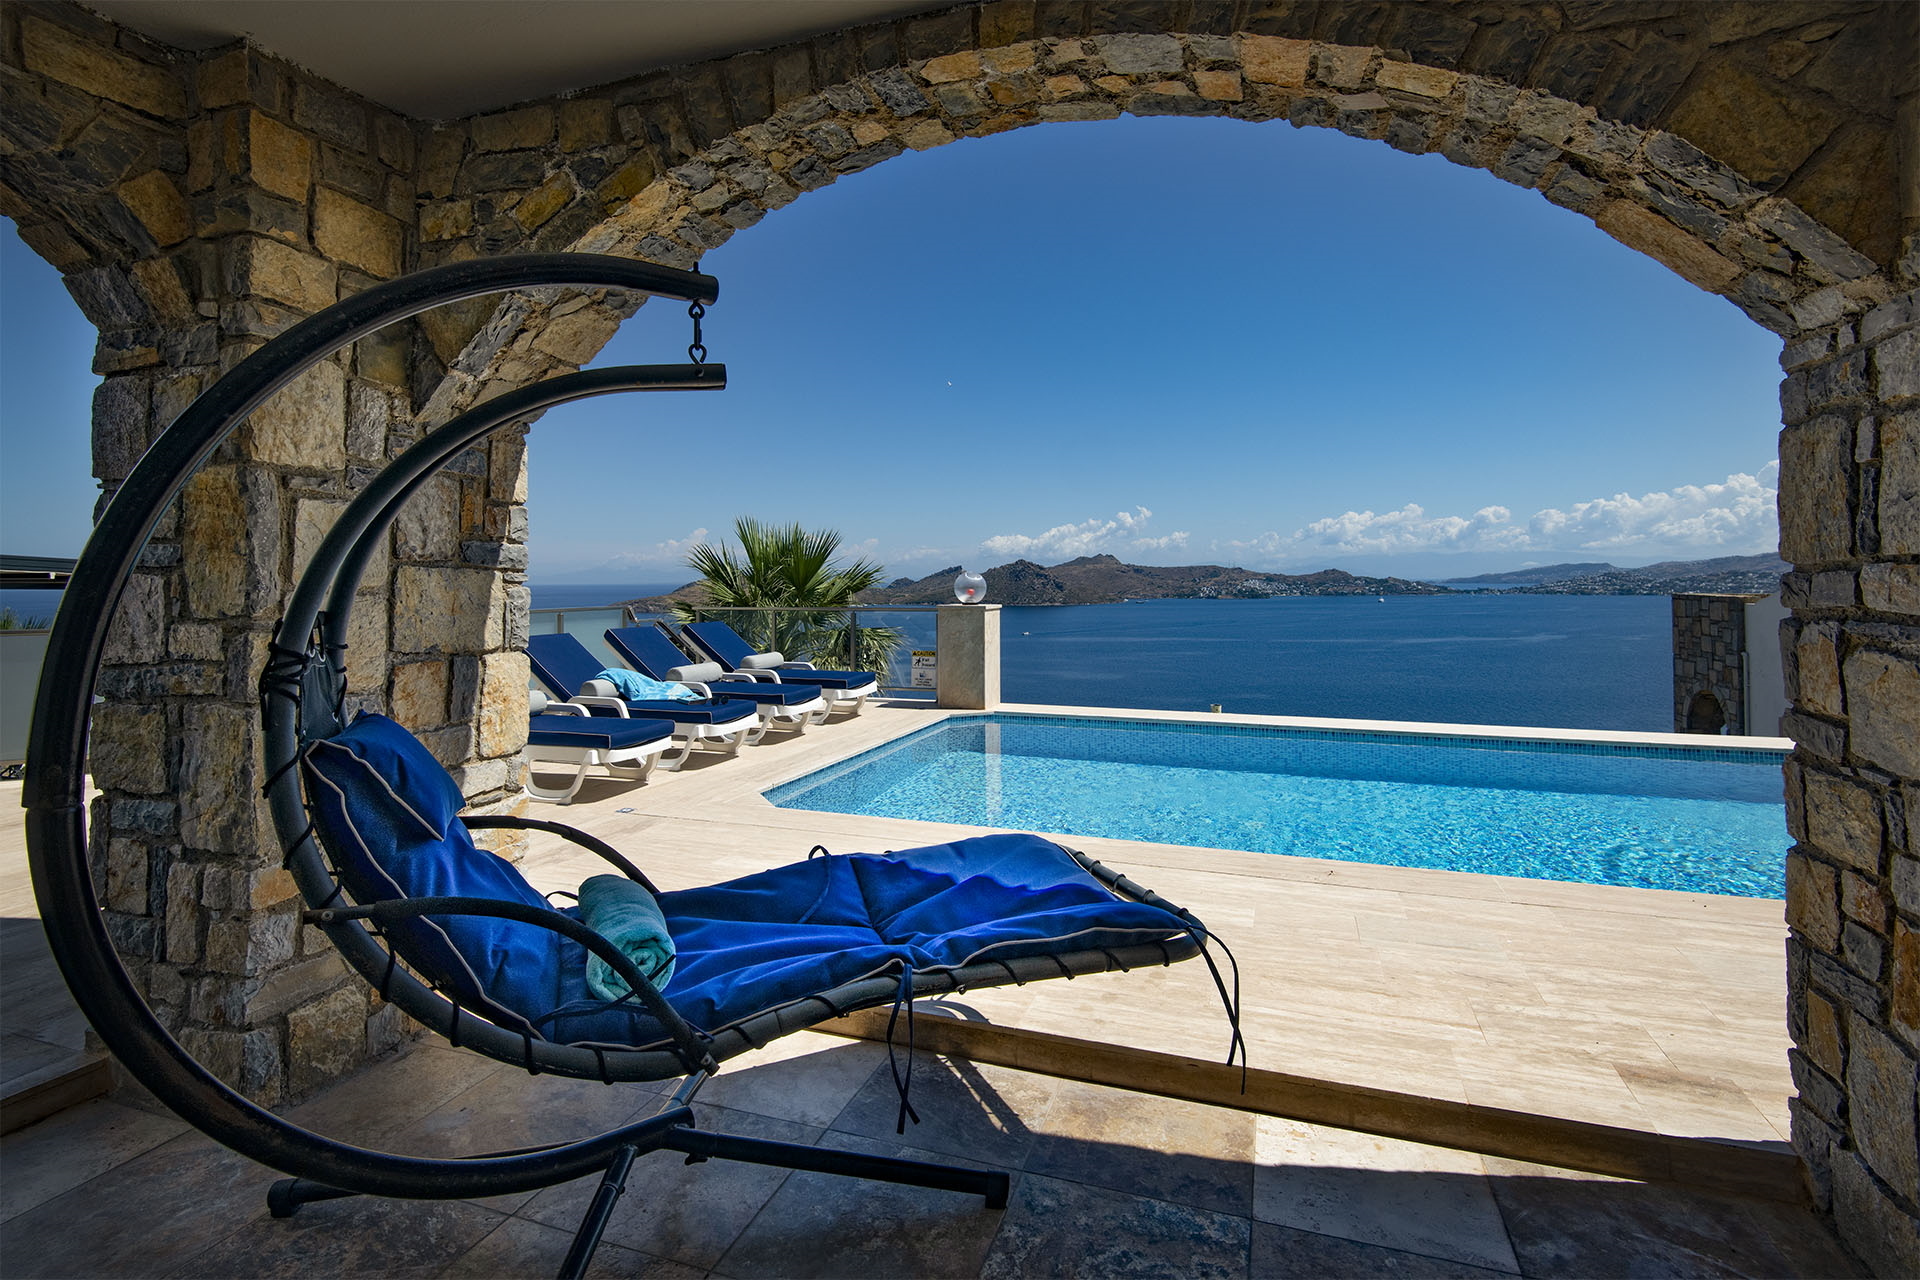 Holiday villas for rent with private pools Bodrum Turkey